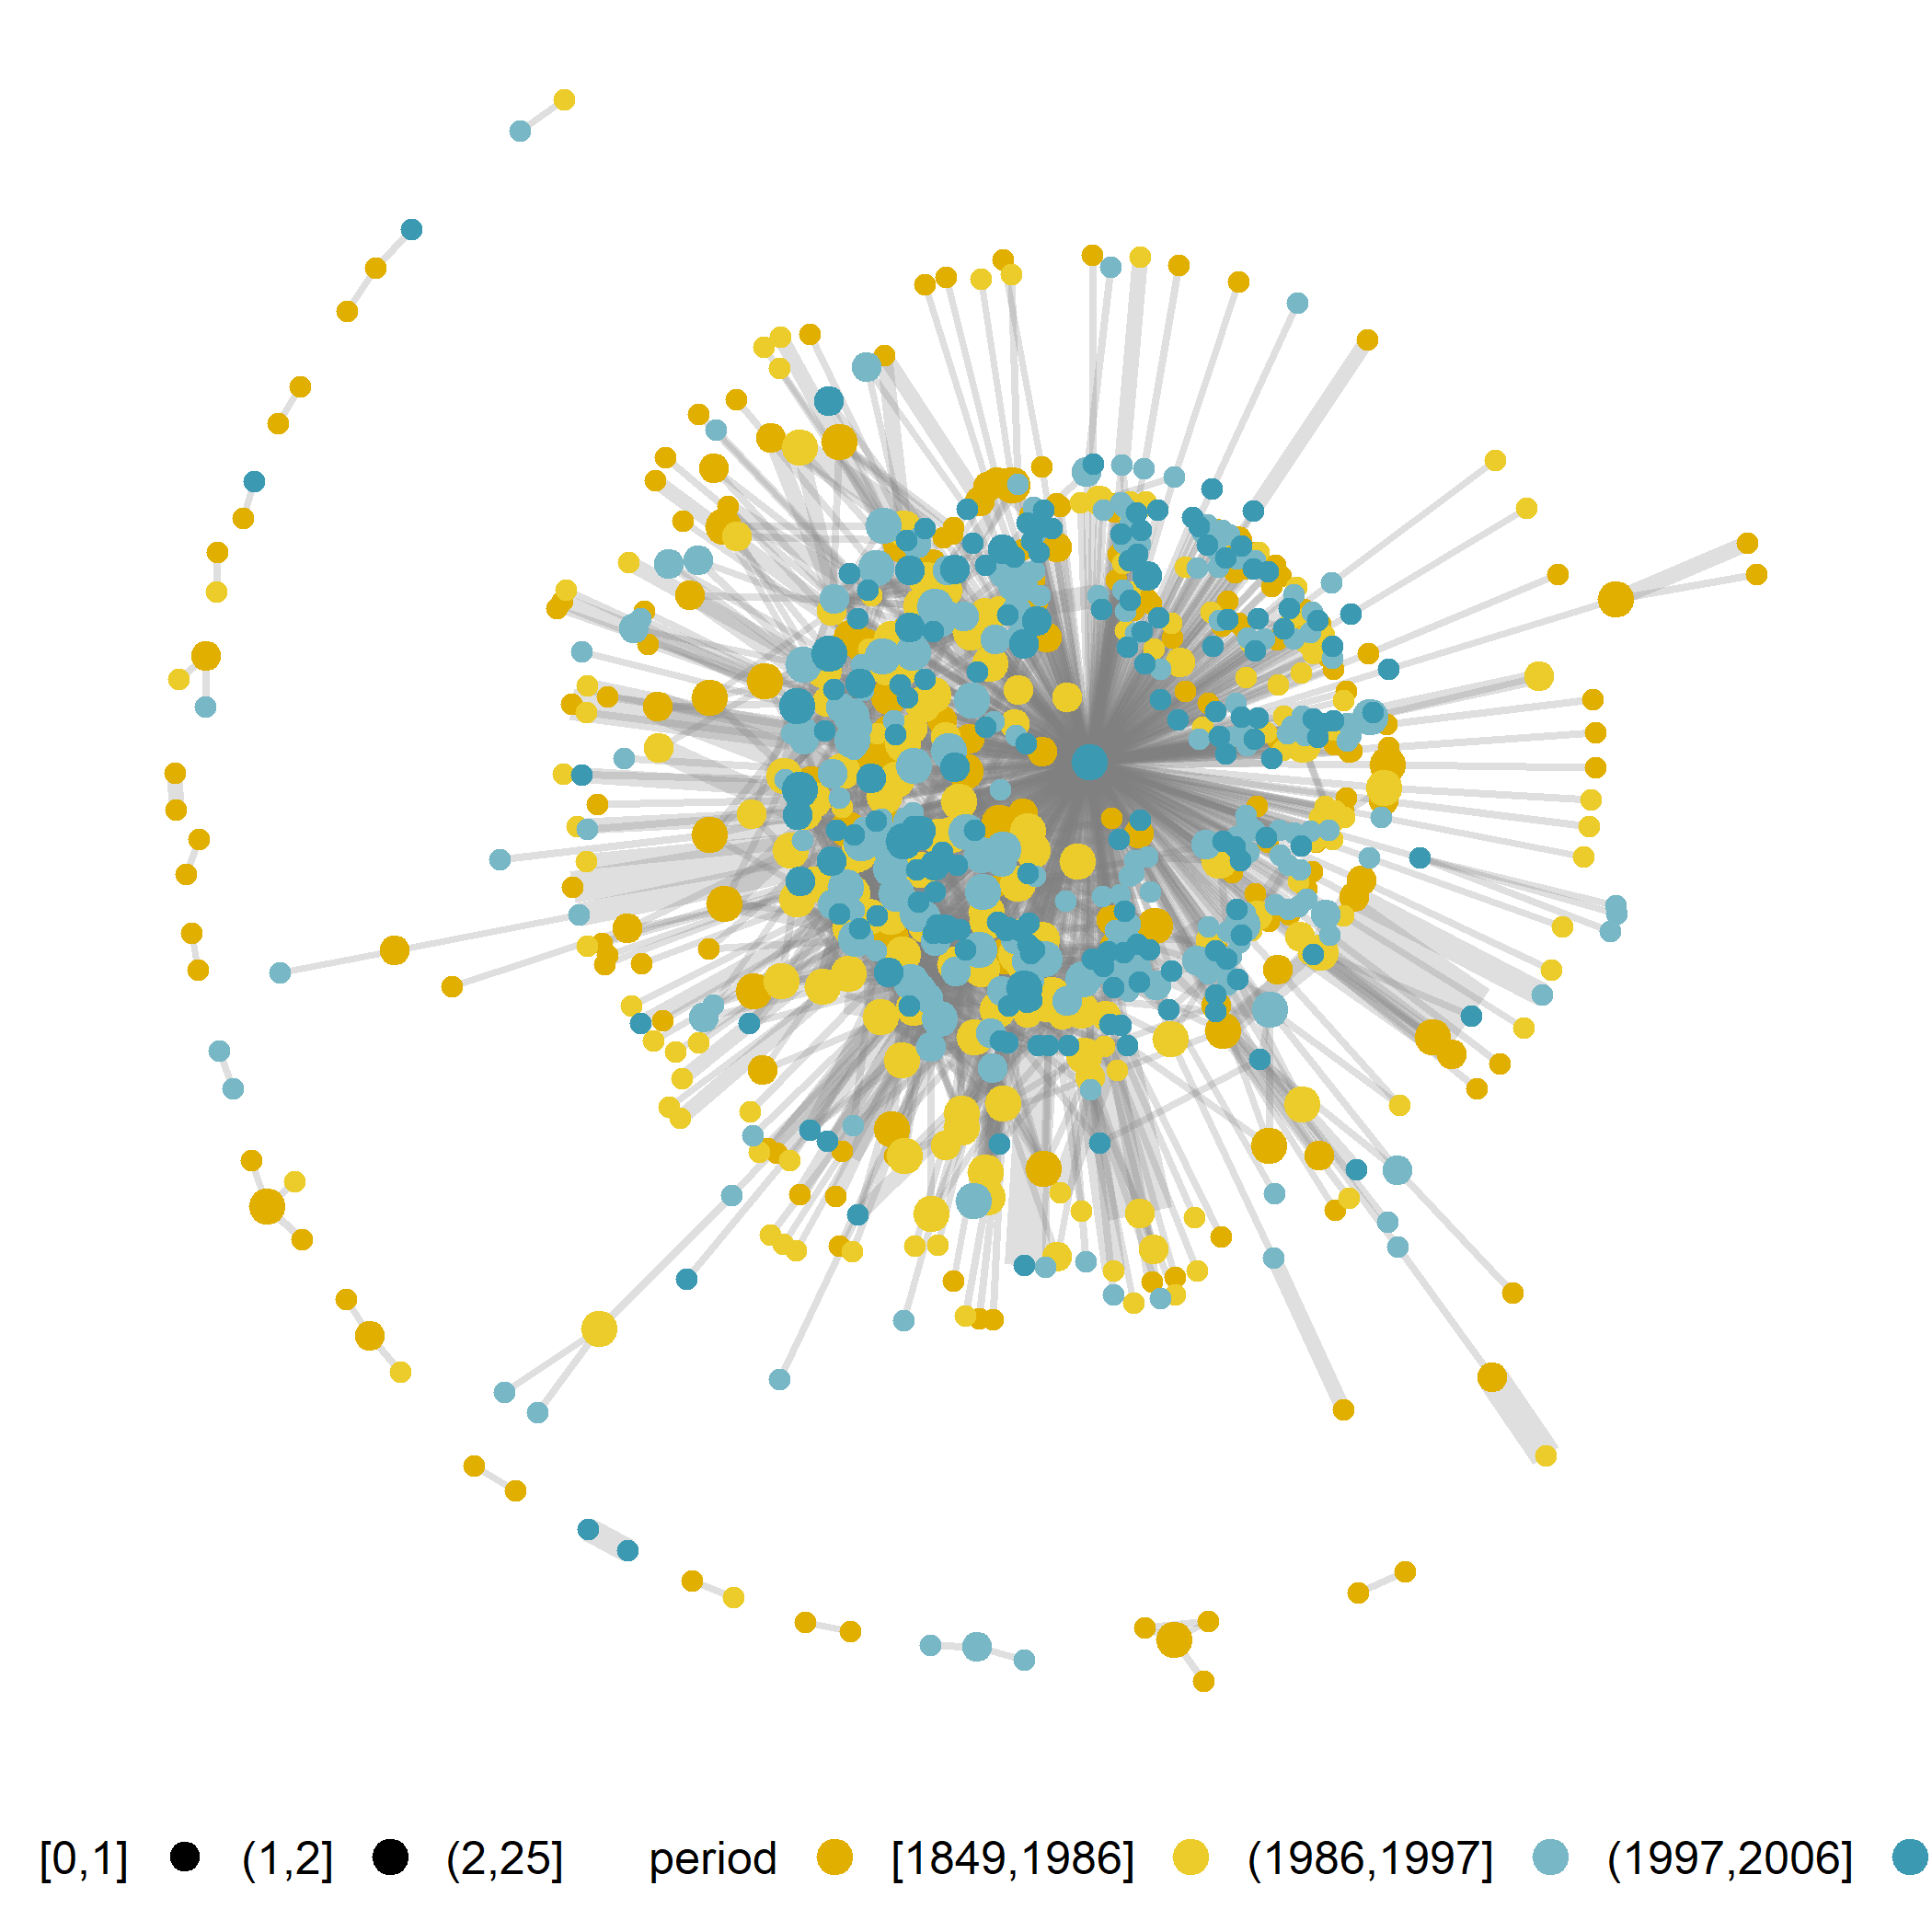 network graphic on icelandic legal